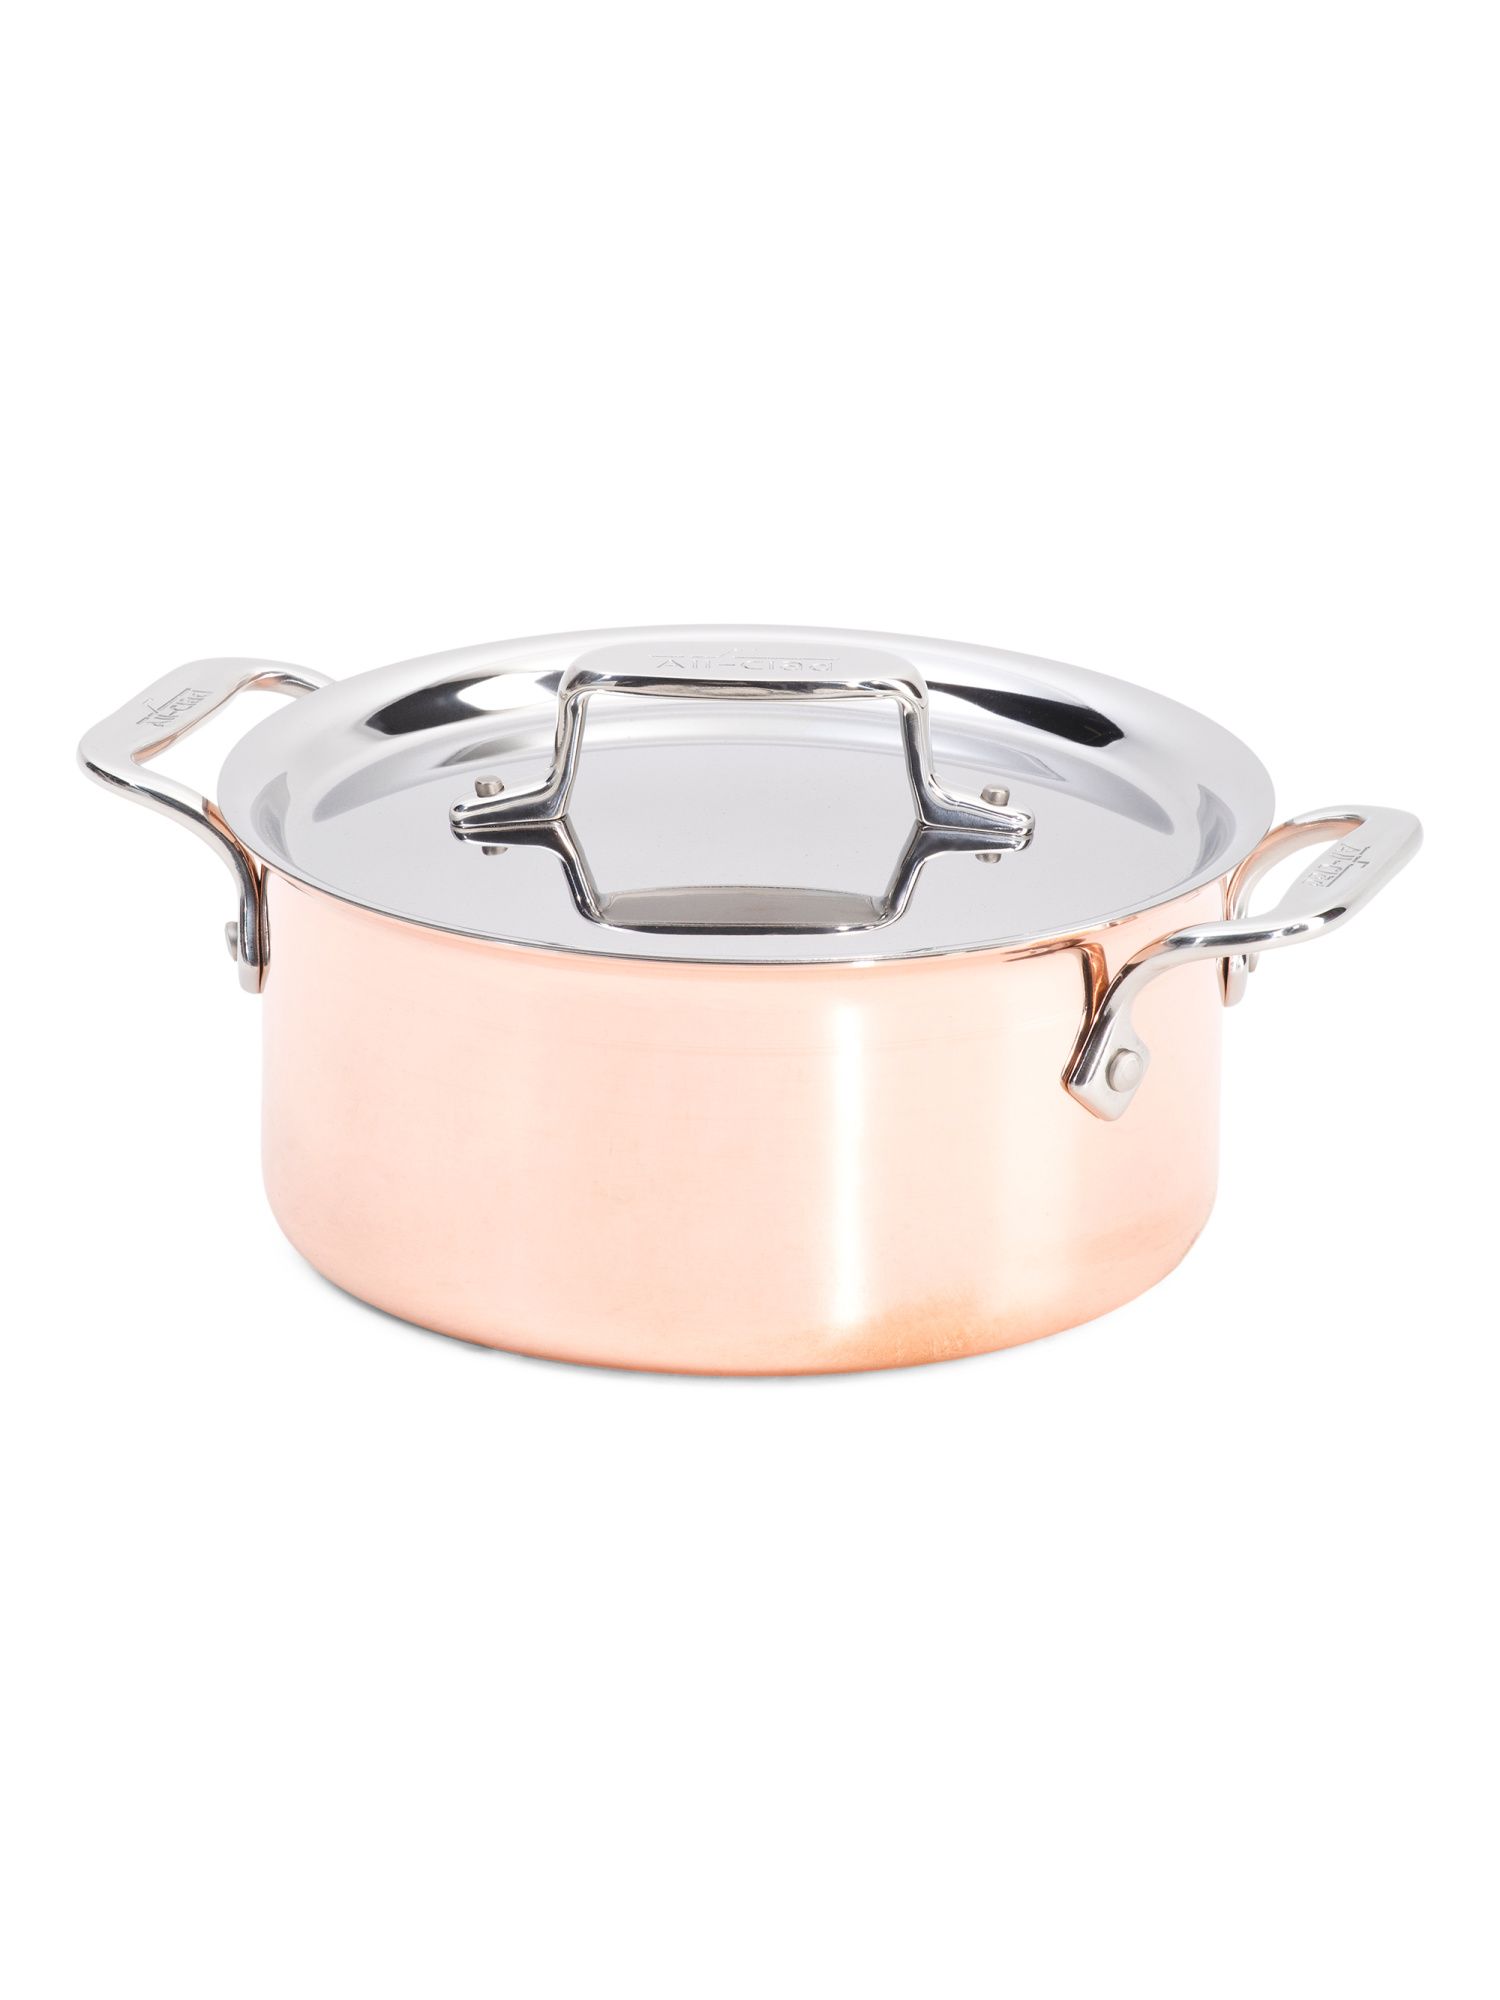 3qt Stainless Steel C2 Copper Soup Pot Slightly Blemished | Luxury Gifts | Marshalls | Marshalls